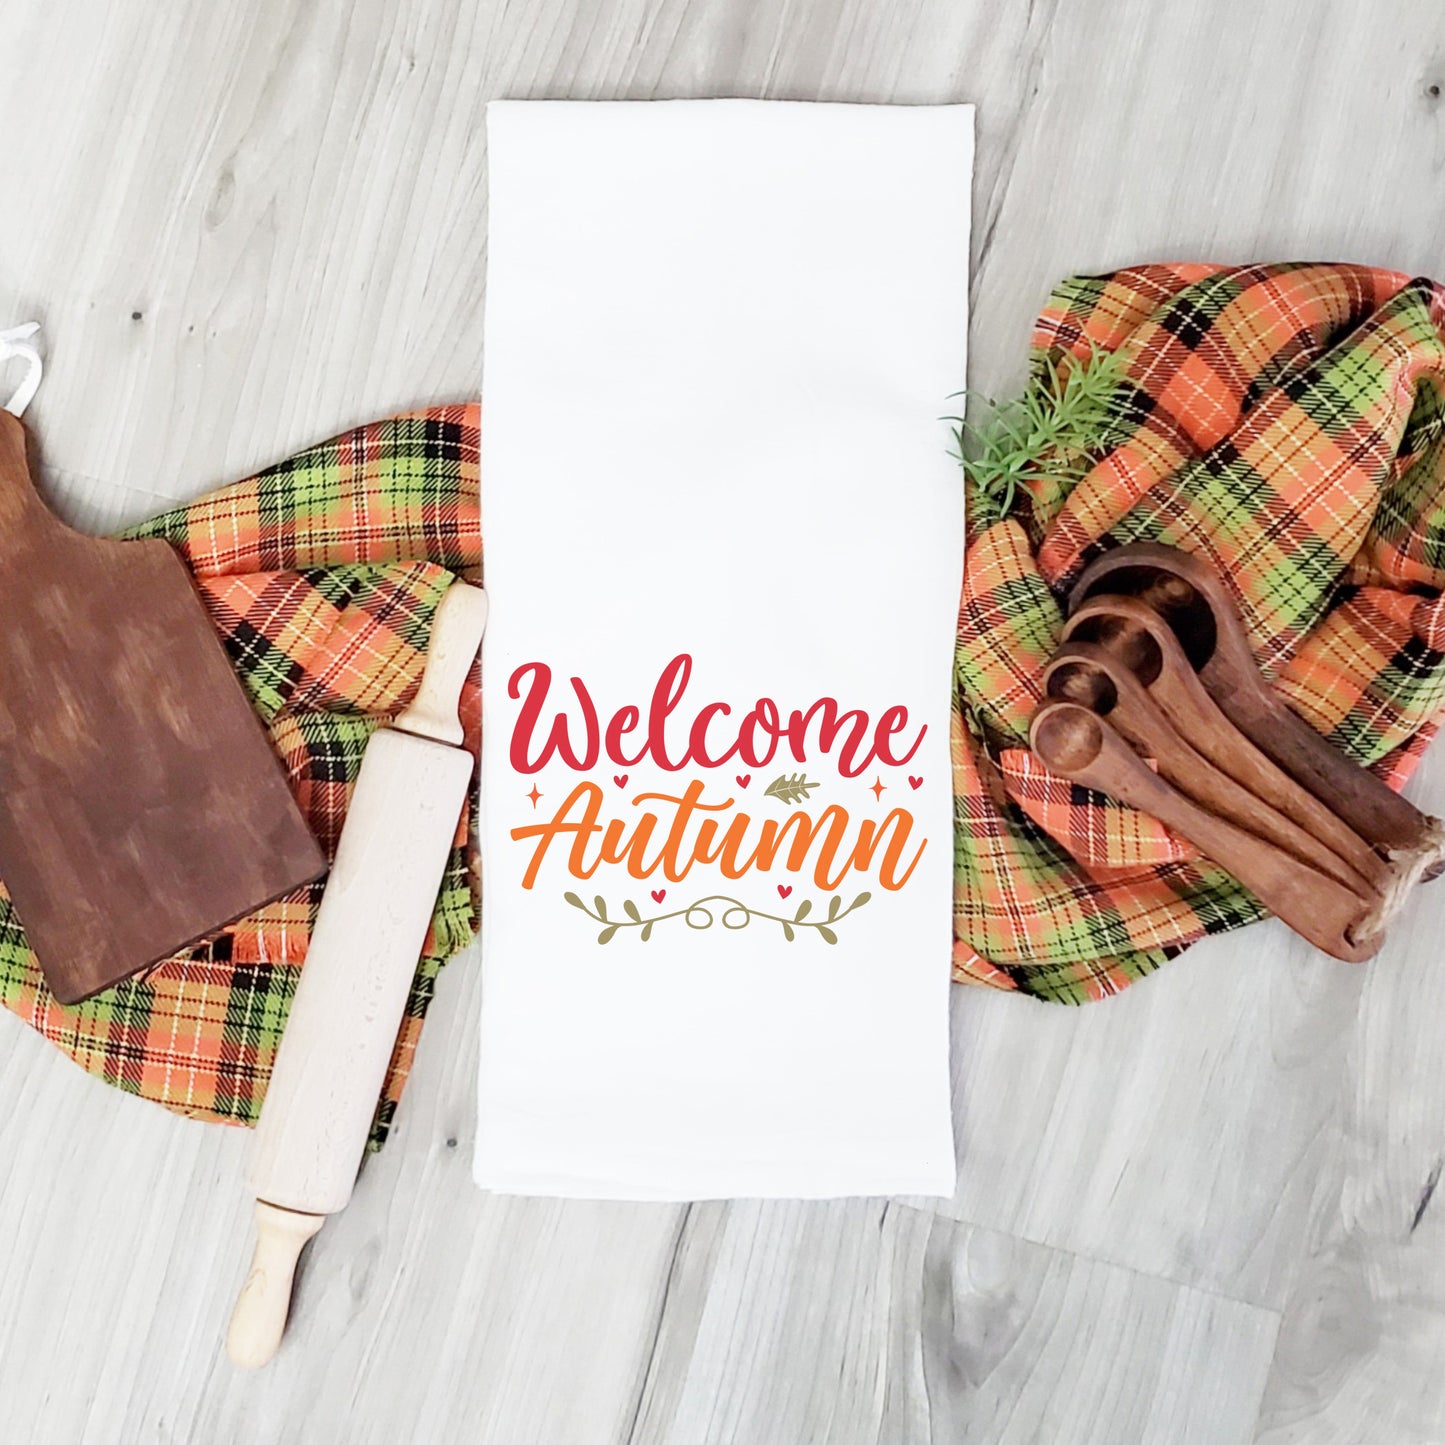 "Welcome Autumn" Graphic